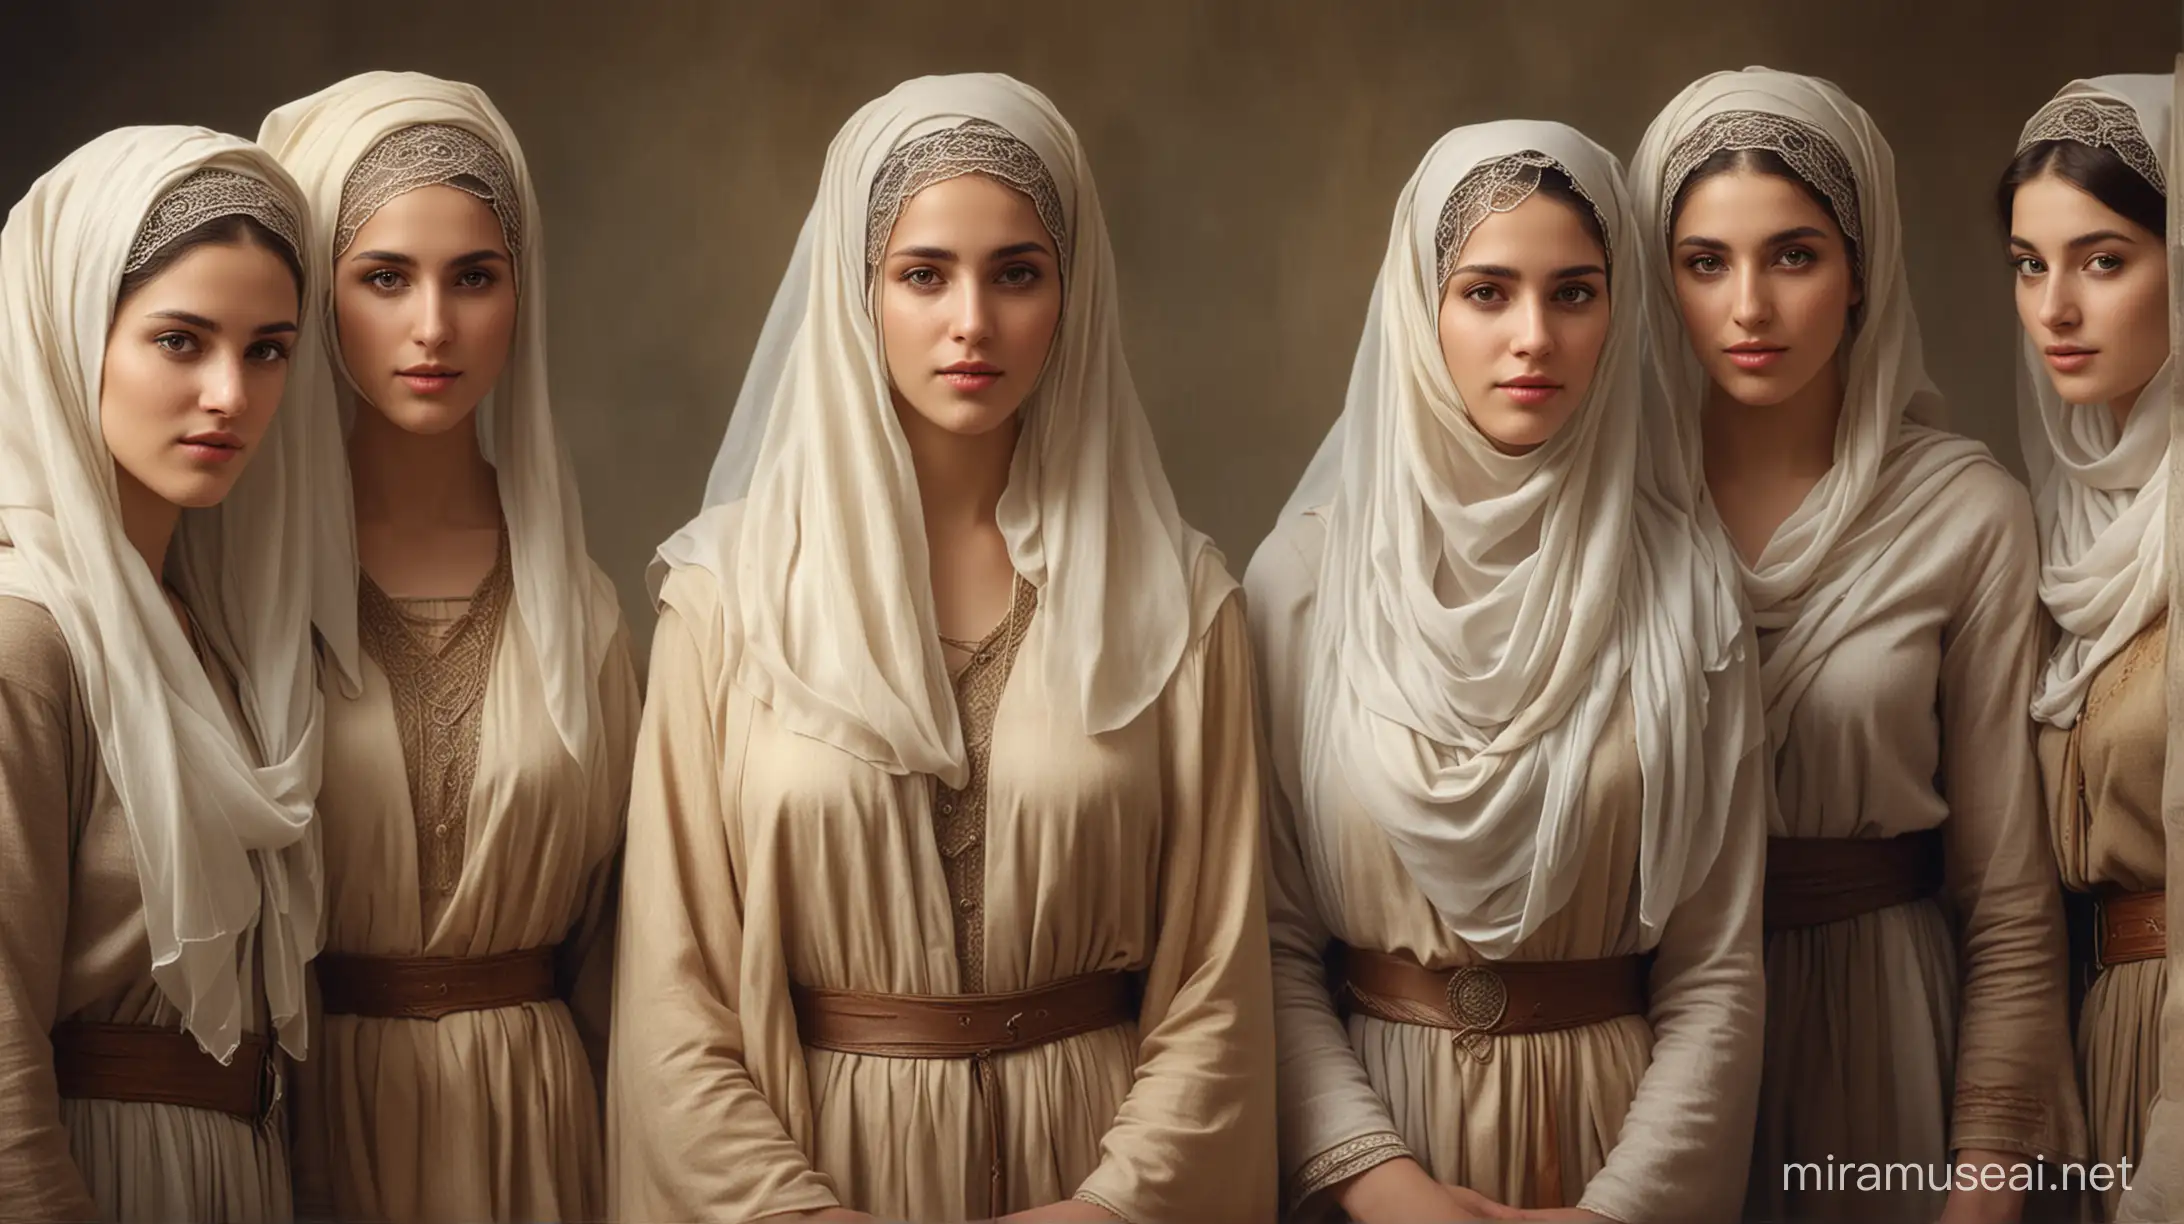 realistic image with 5 women, beautiful young women, in clothes from the time of Gerusaleh before Christ, dressed in clothes from that time with veils on their heads